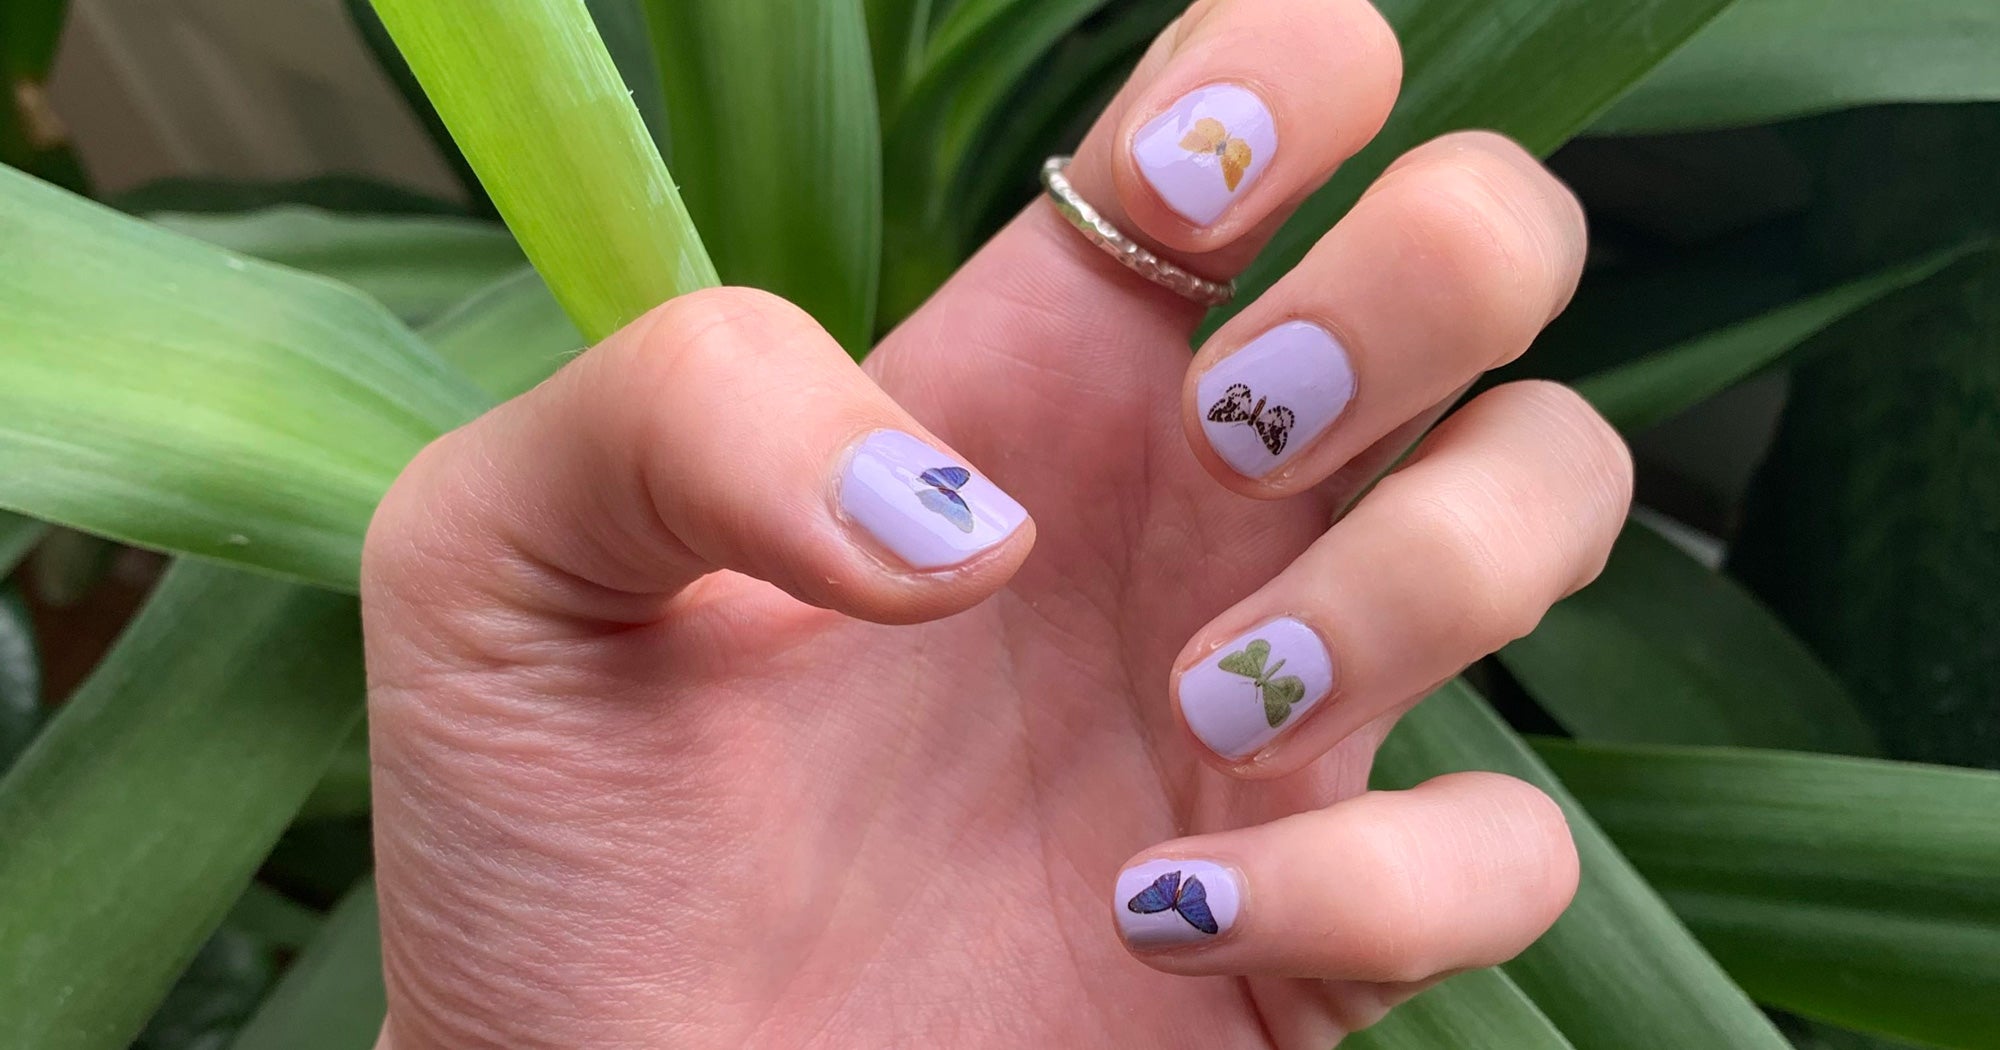 10 Best Nail Salons In Los Angeles, California